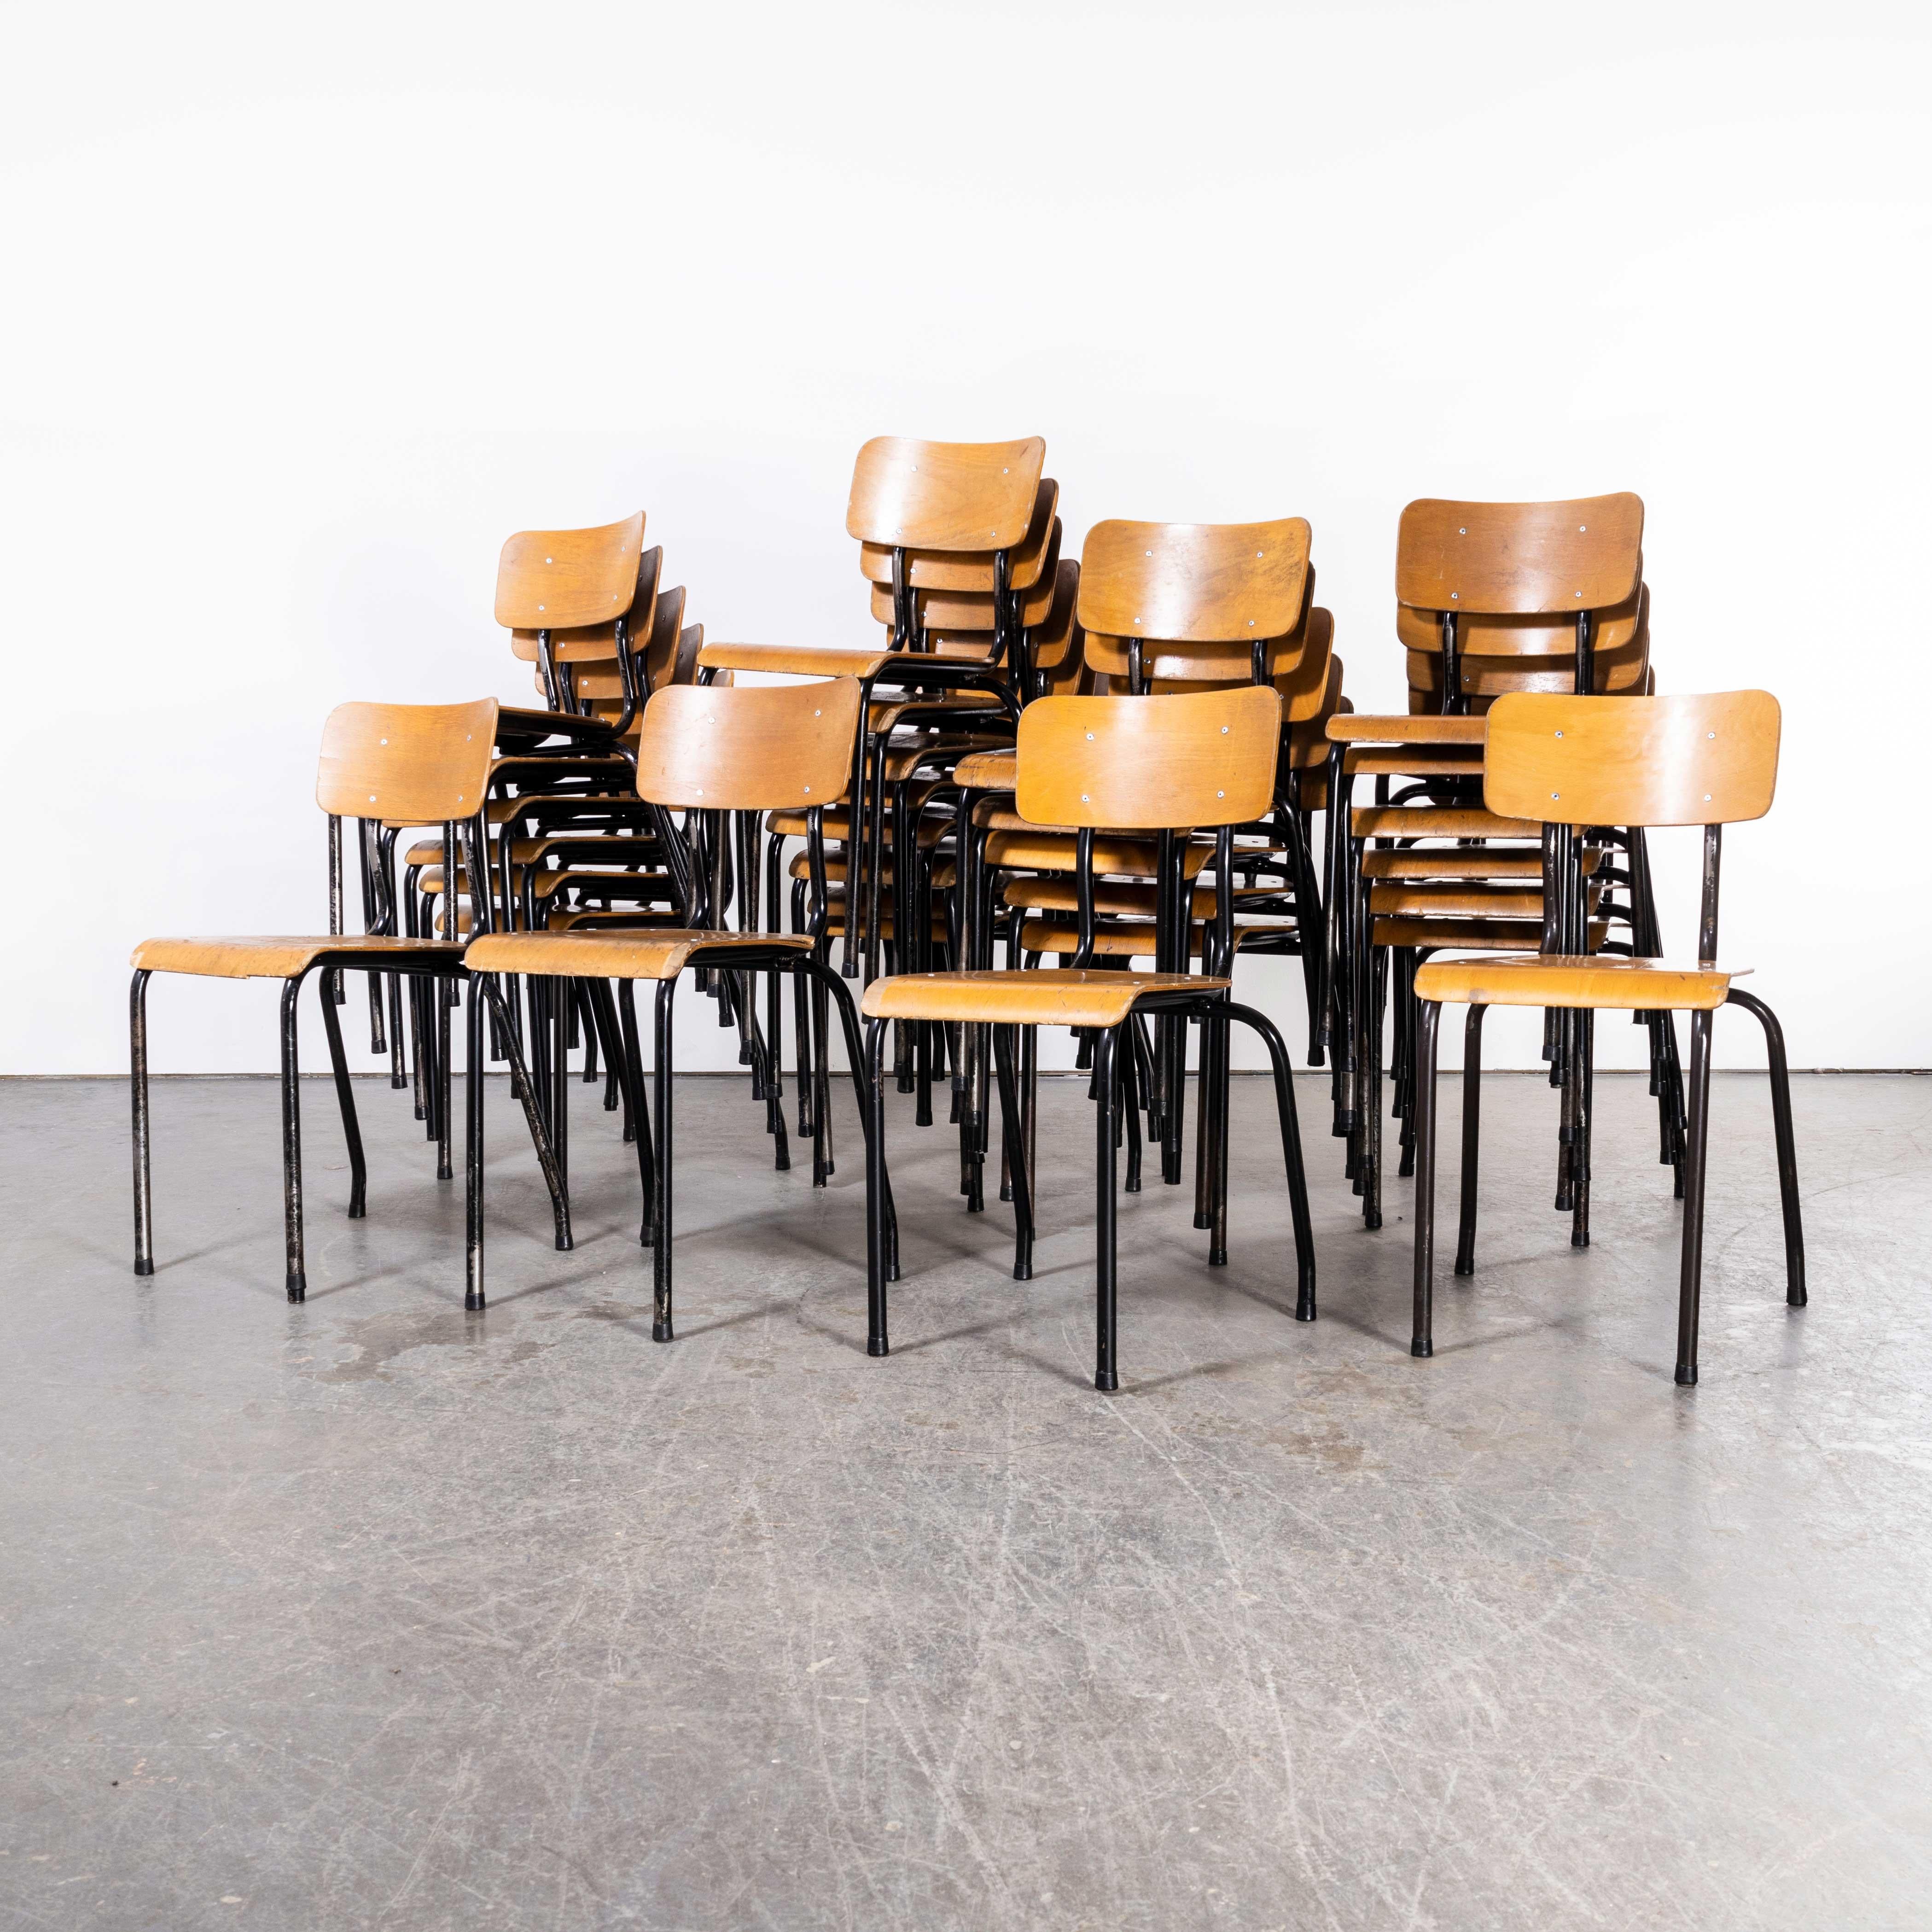 1960’s Batch Of Belgian Stacking School Chairs – Set Of Eighteen
1960’s Batch Of Belgian Stacking School Chairs – Set Of Eighteen. Good tough set of Belgian stacking chairs perfect for commercial use. Image shows more than eighteen chairs, the